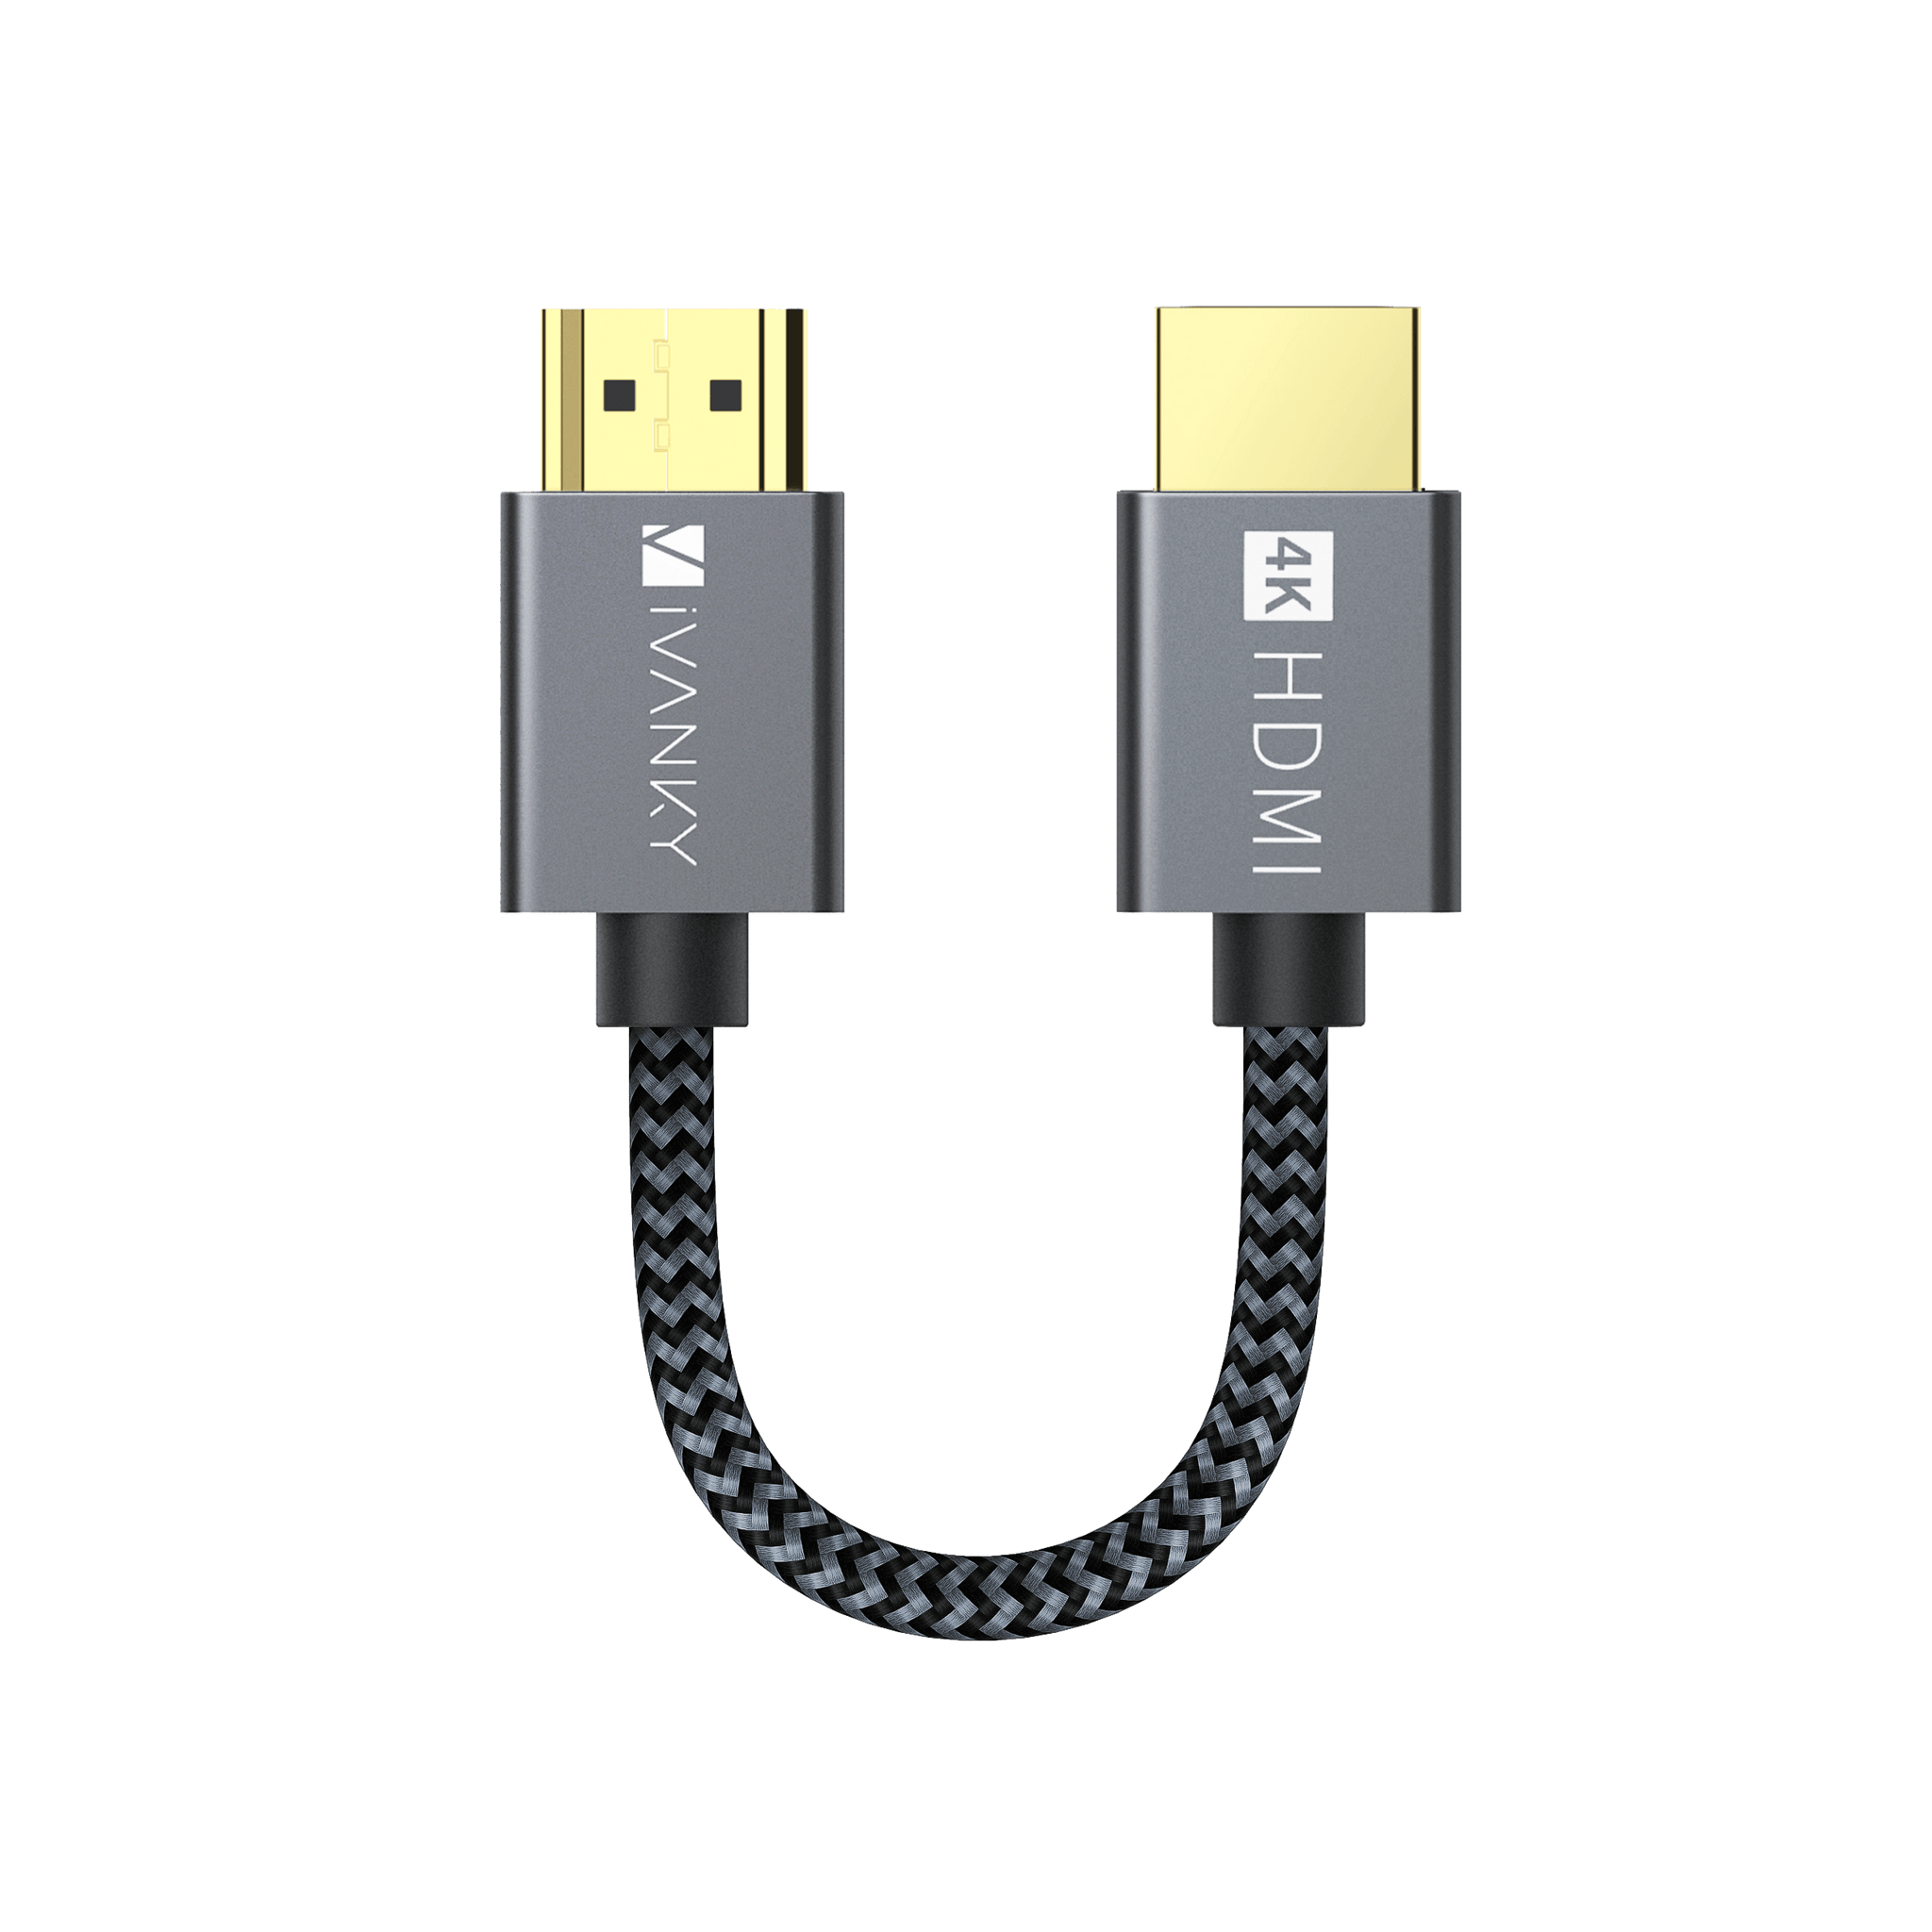 8K HDMI 2.1 Cable - Braided – iVANKY